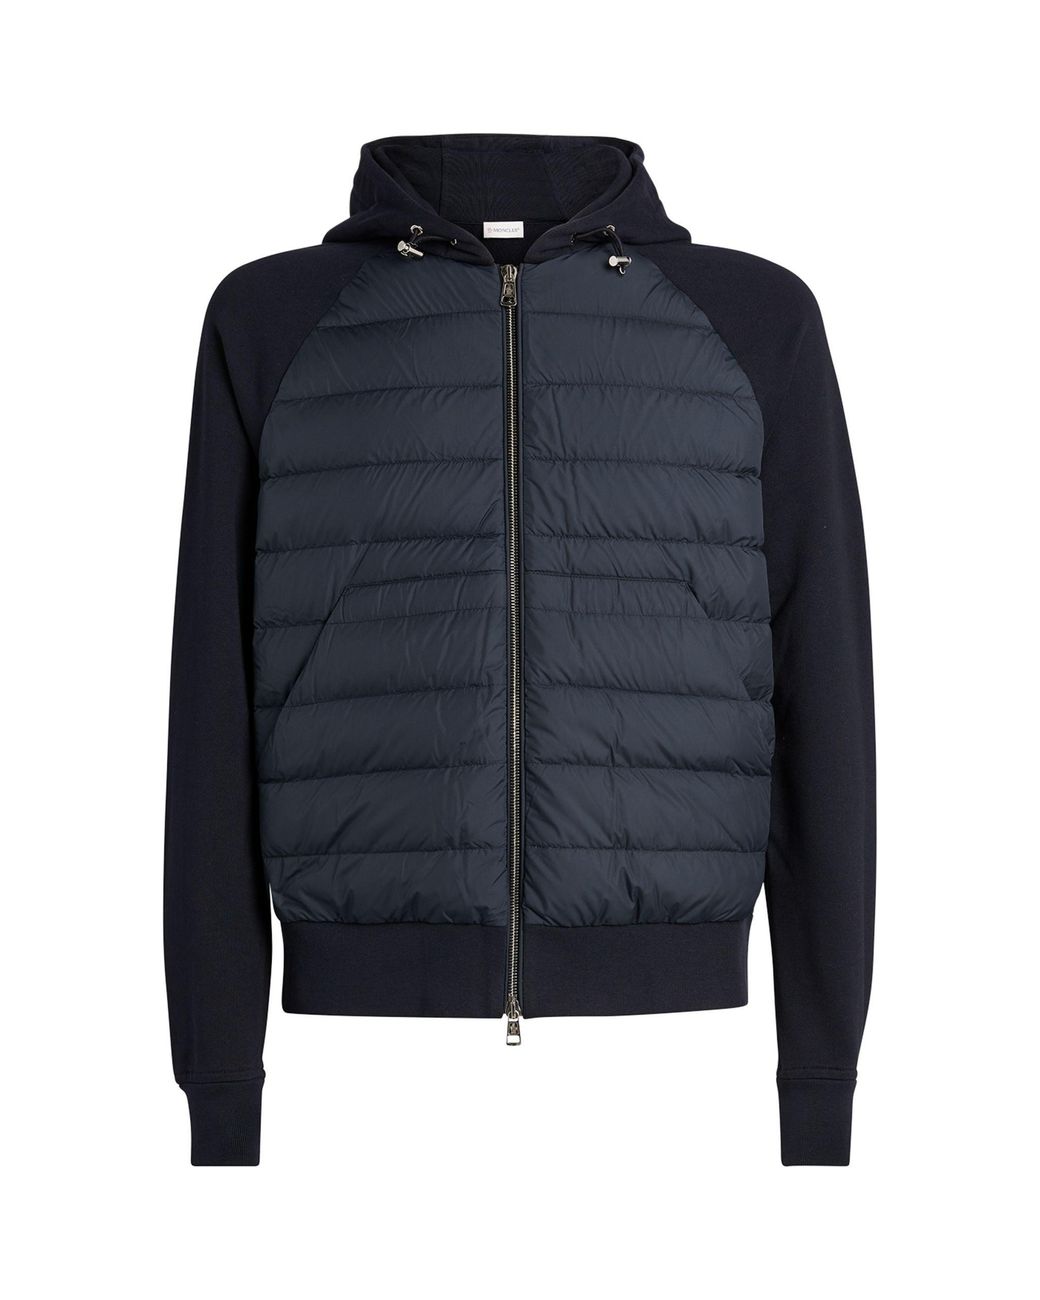 Moncler Cotton Contrast Zip-up Hooded Cardigan in Blue for Men - Lyst